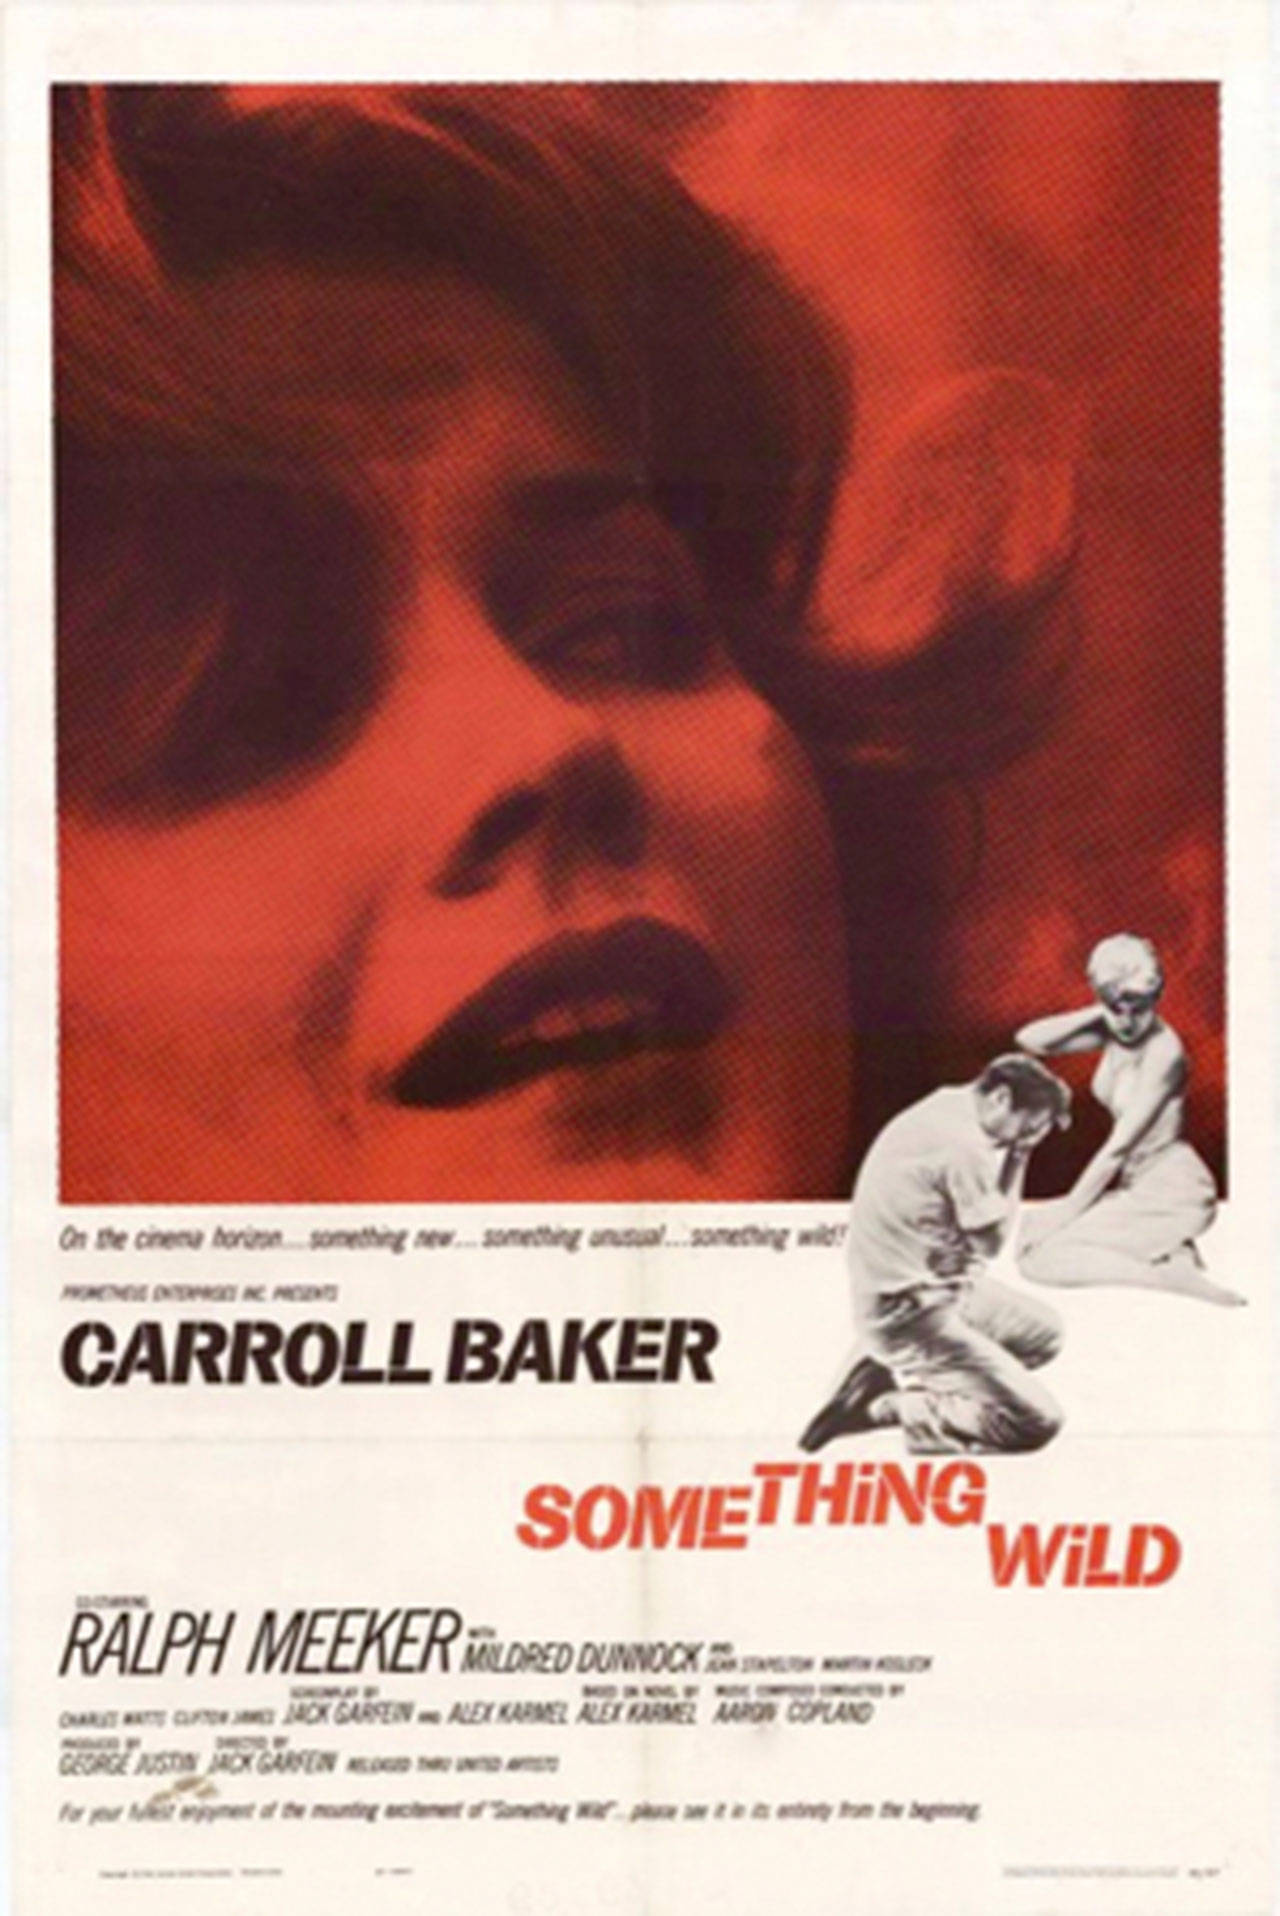 Image courtesy of United Artists                                 The three-film “No Direction Home” series will kick off on Thursday, July 13 with “Something Wild” (1961) at the Lynwood Theater.